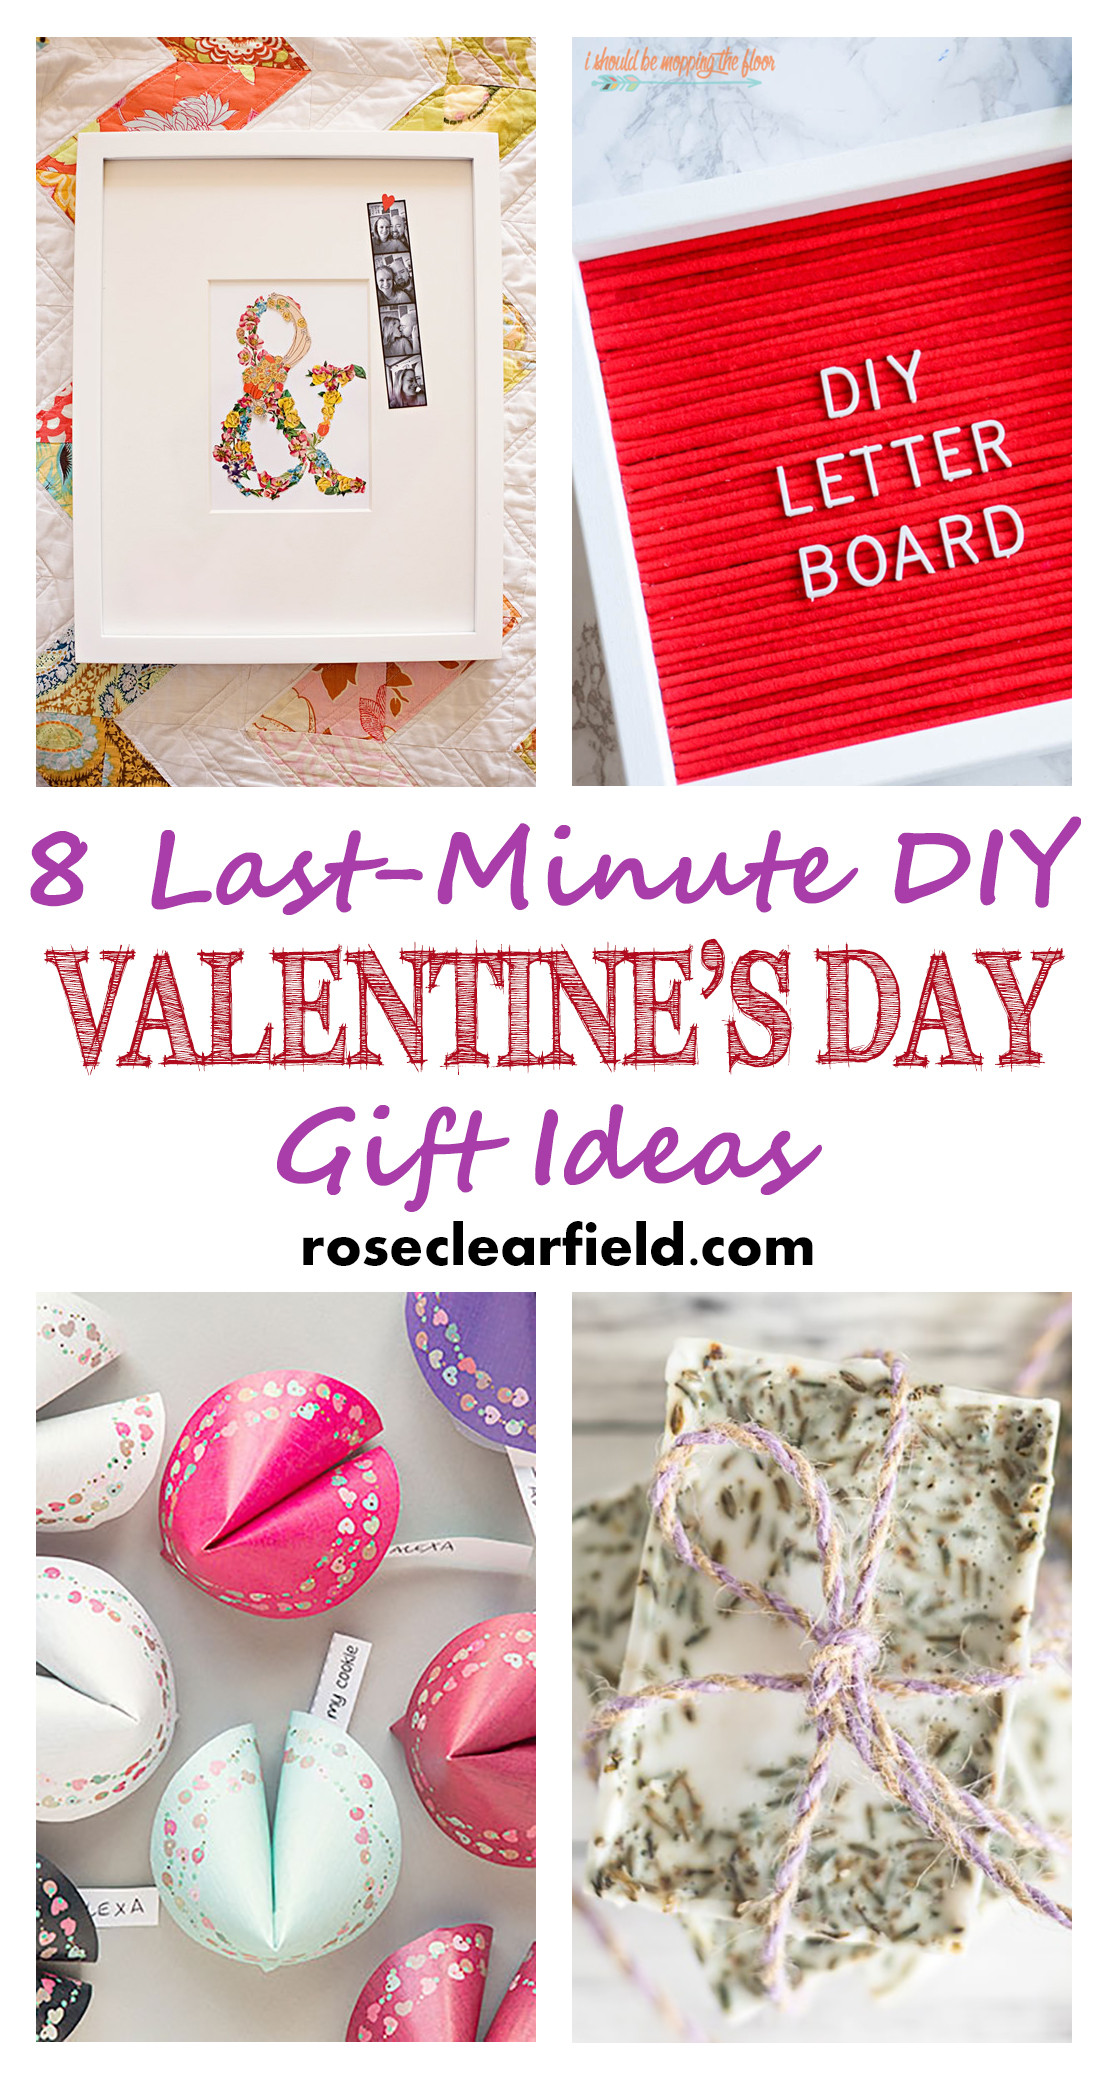 Valentines Ideas Gift
 Last Minute DIY Valentine s Day Gift Ideas • Rose Clearfield